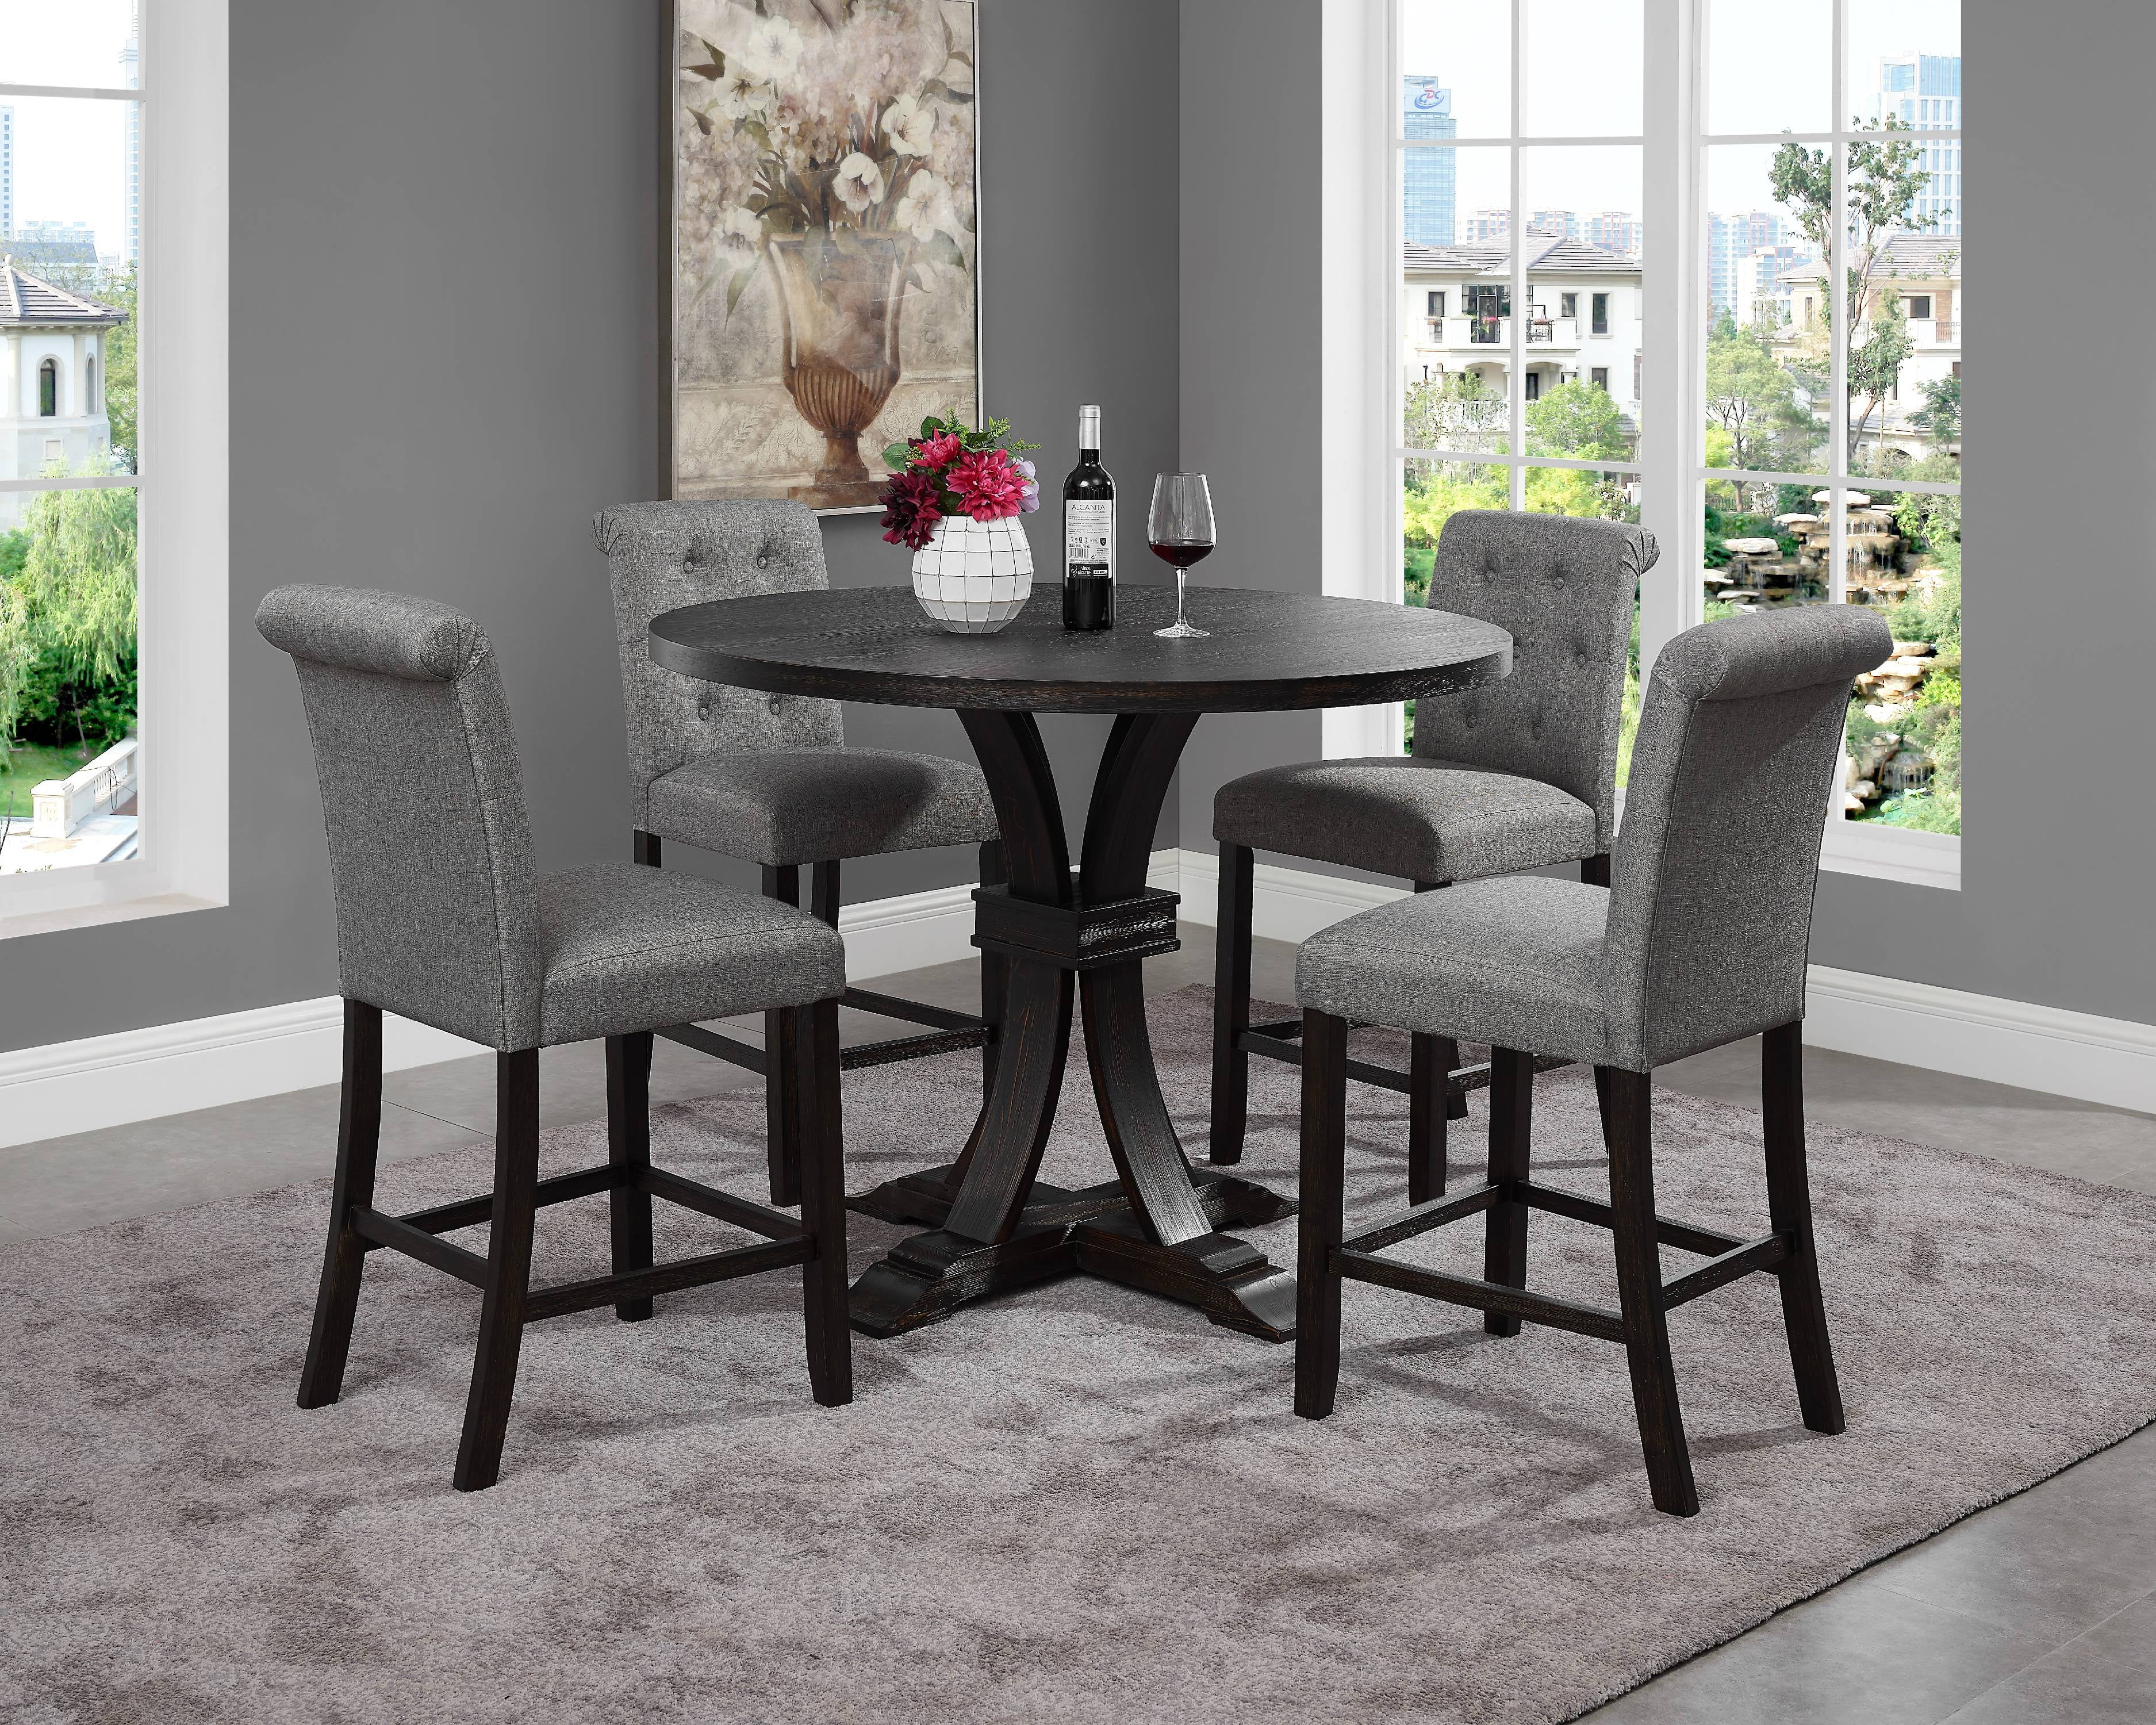 Siena Distressed Black Finish 5 Piece, Round High Top Dining Table And Chairs